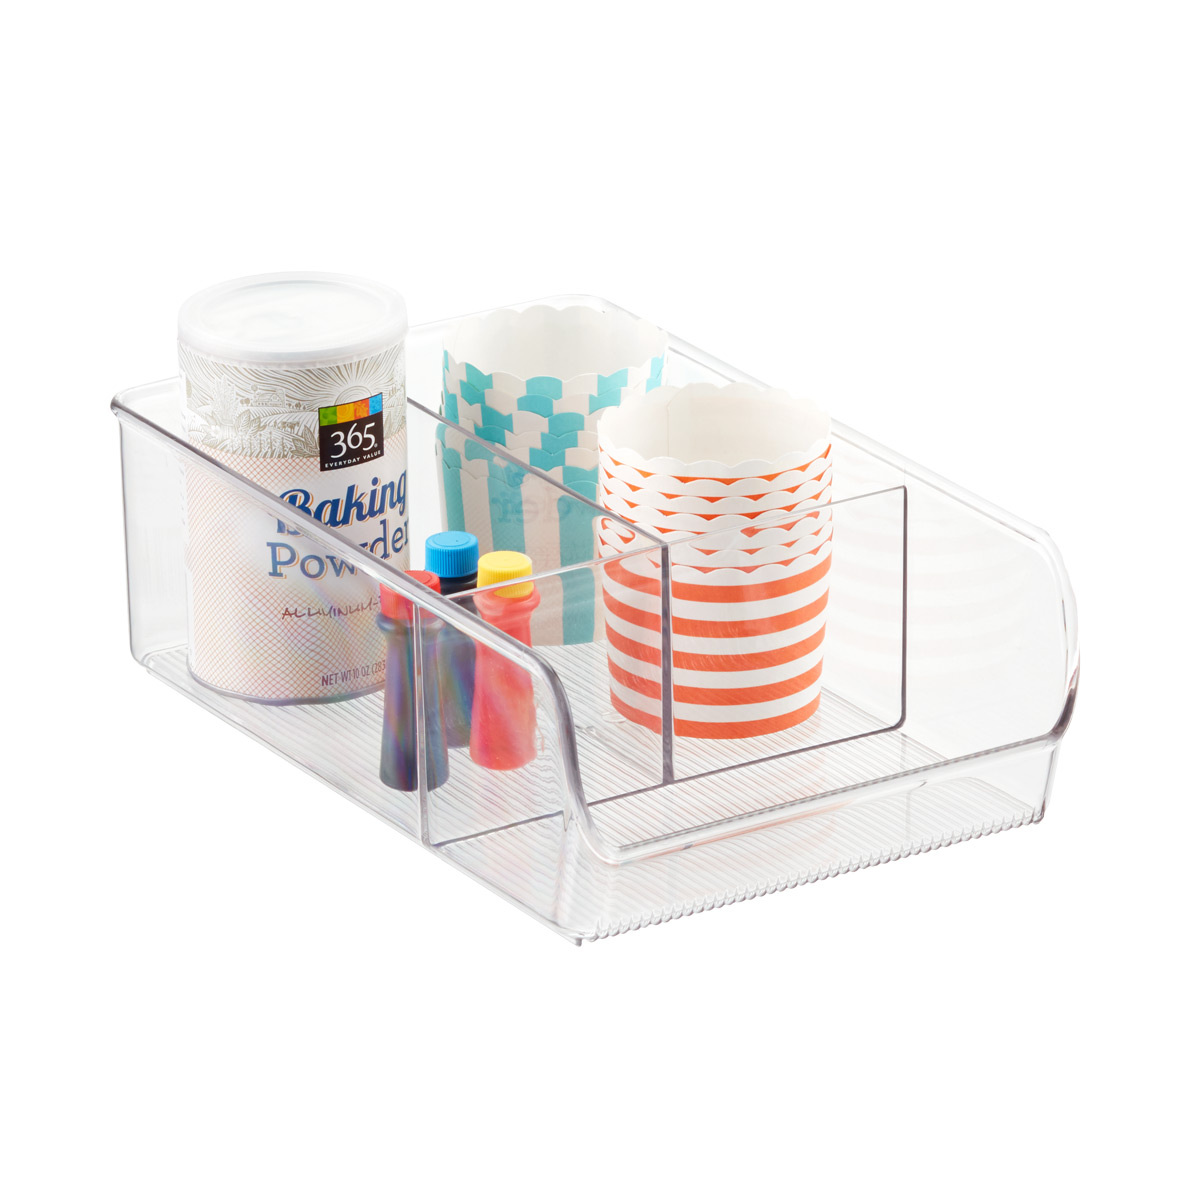 https://www.containerstore.com/catalogimages/314819/10048914-linus-wide-3-section-cabine.jpg